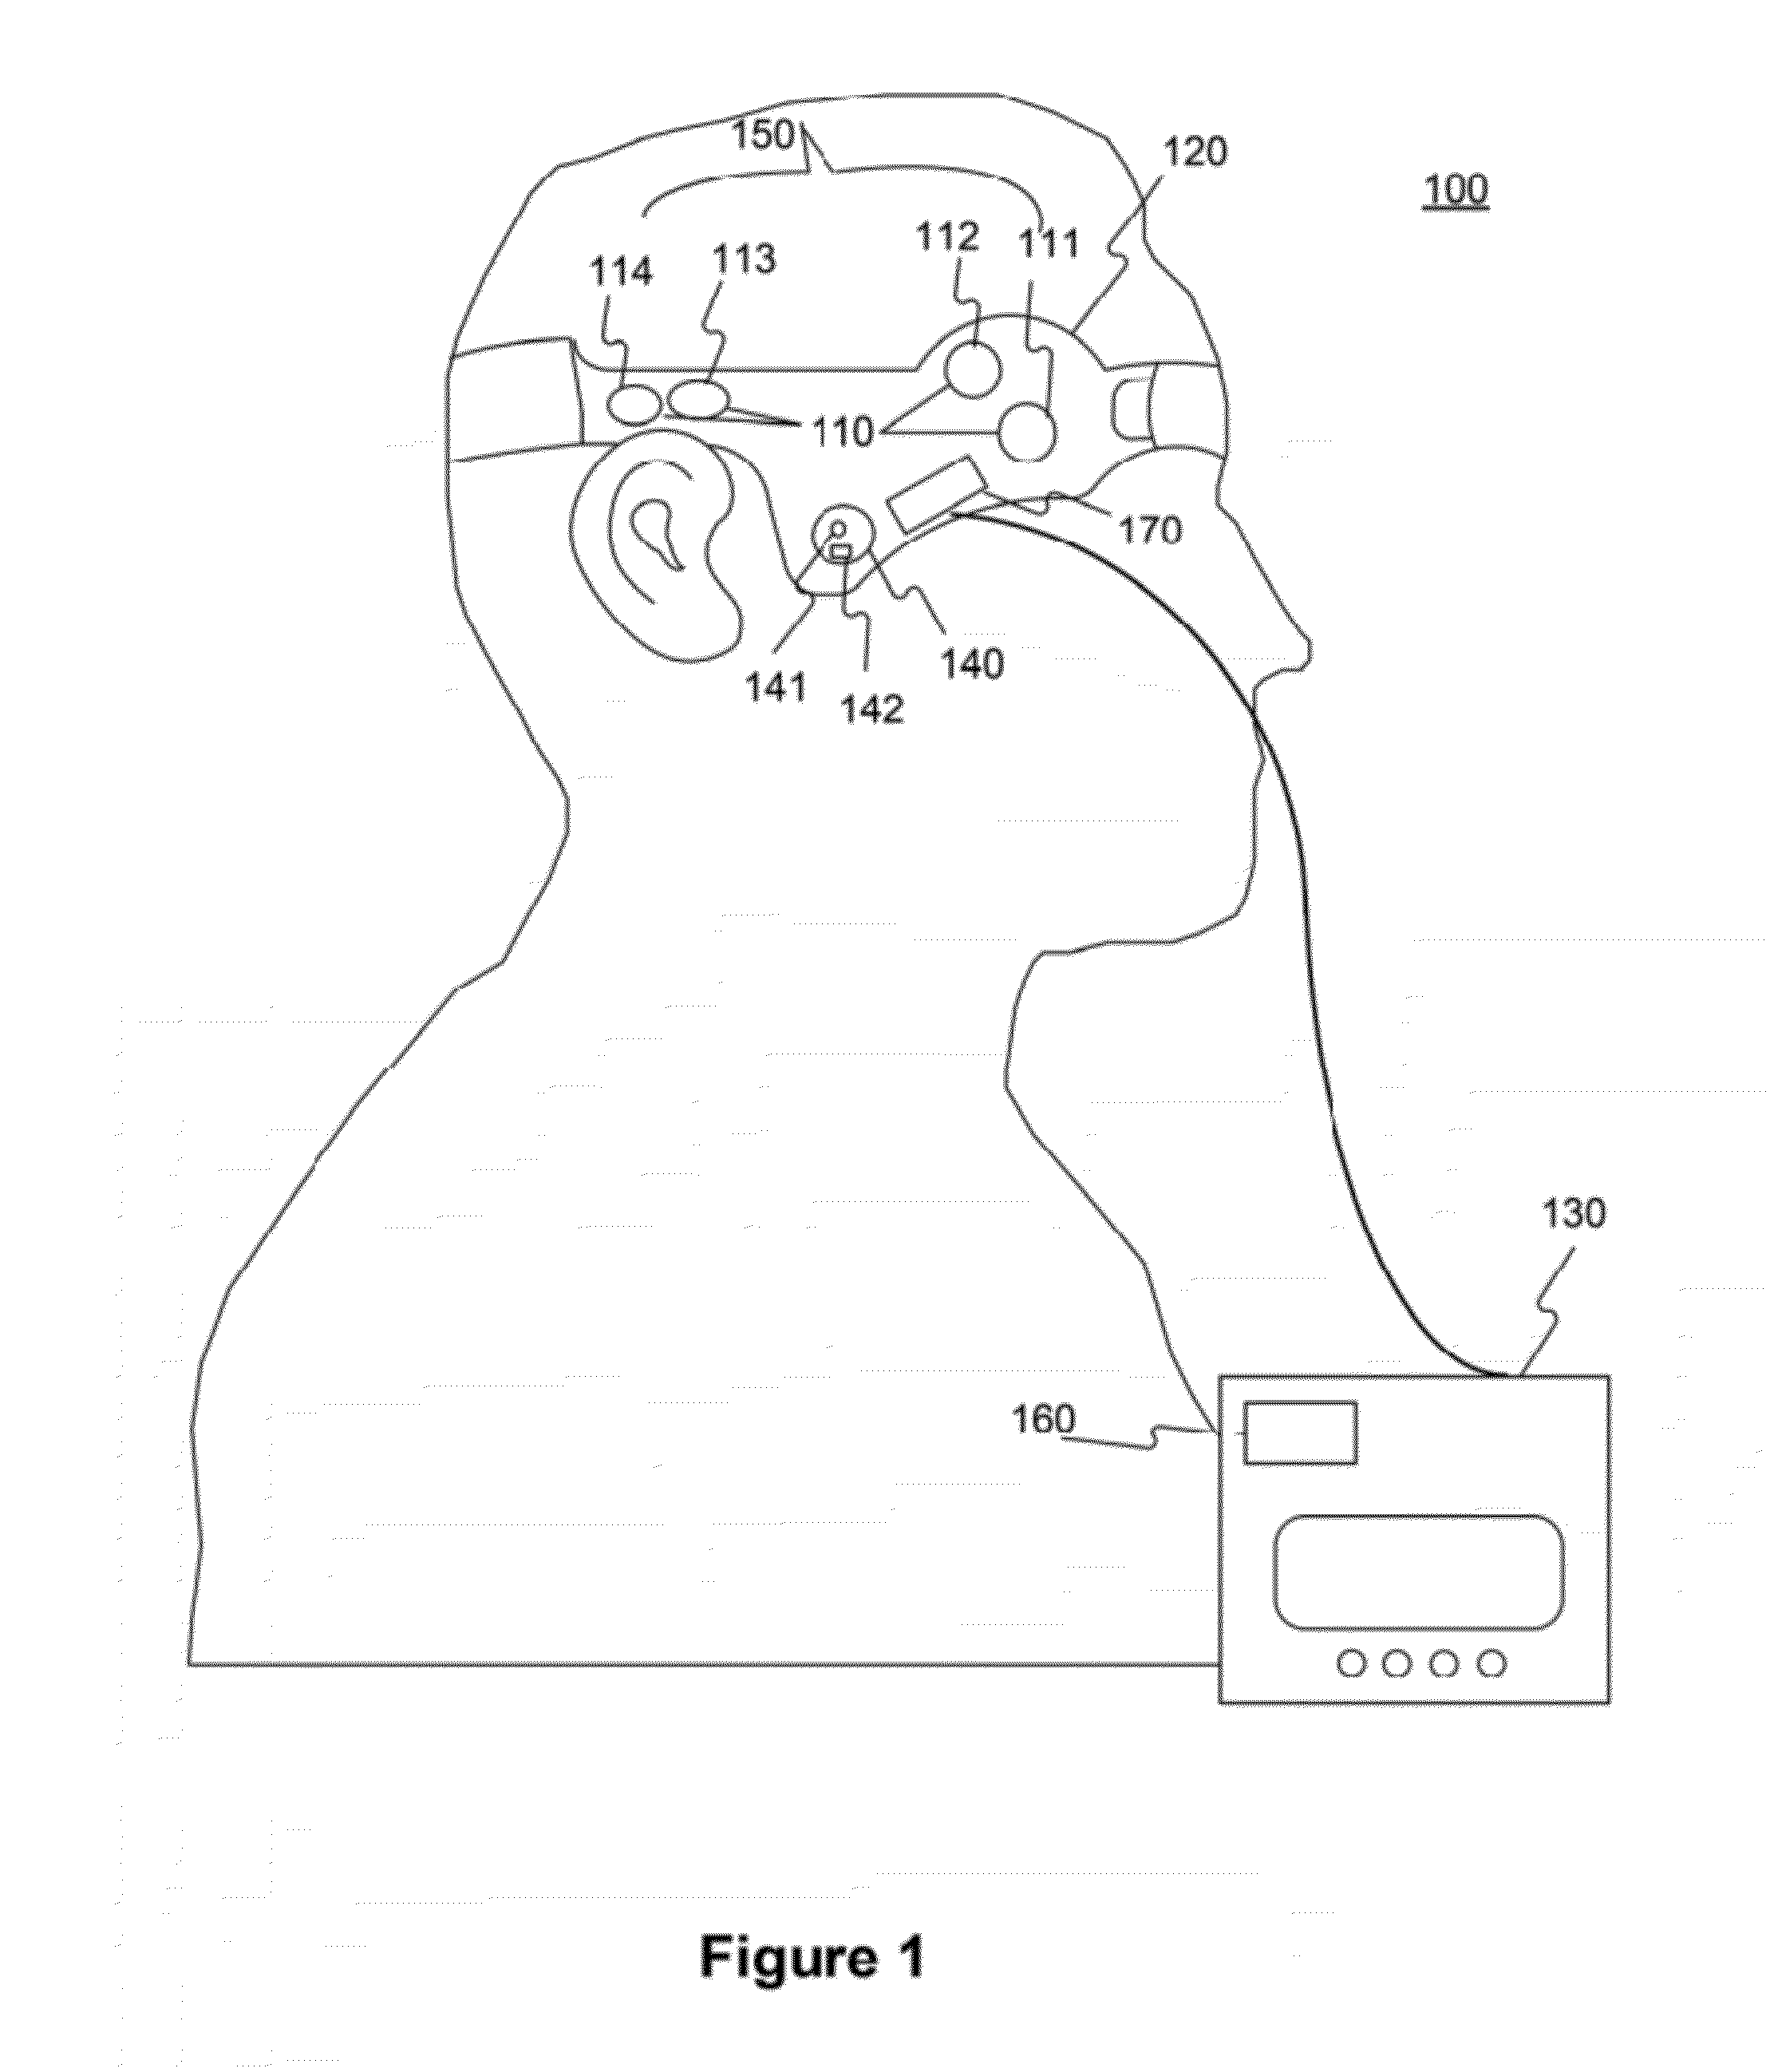 Devices and methods for monitoring cerebral hemodynamic conditions